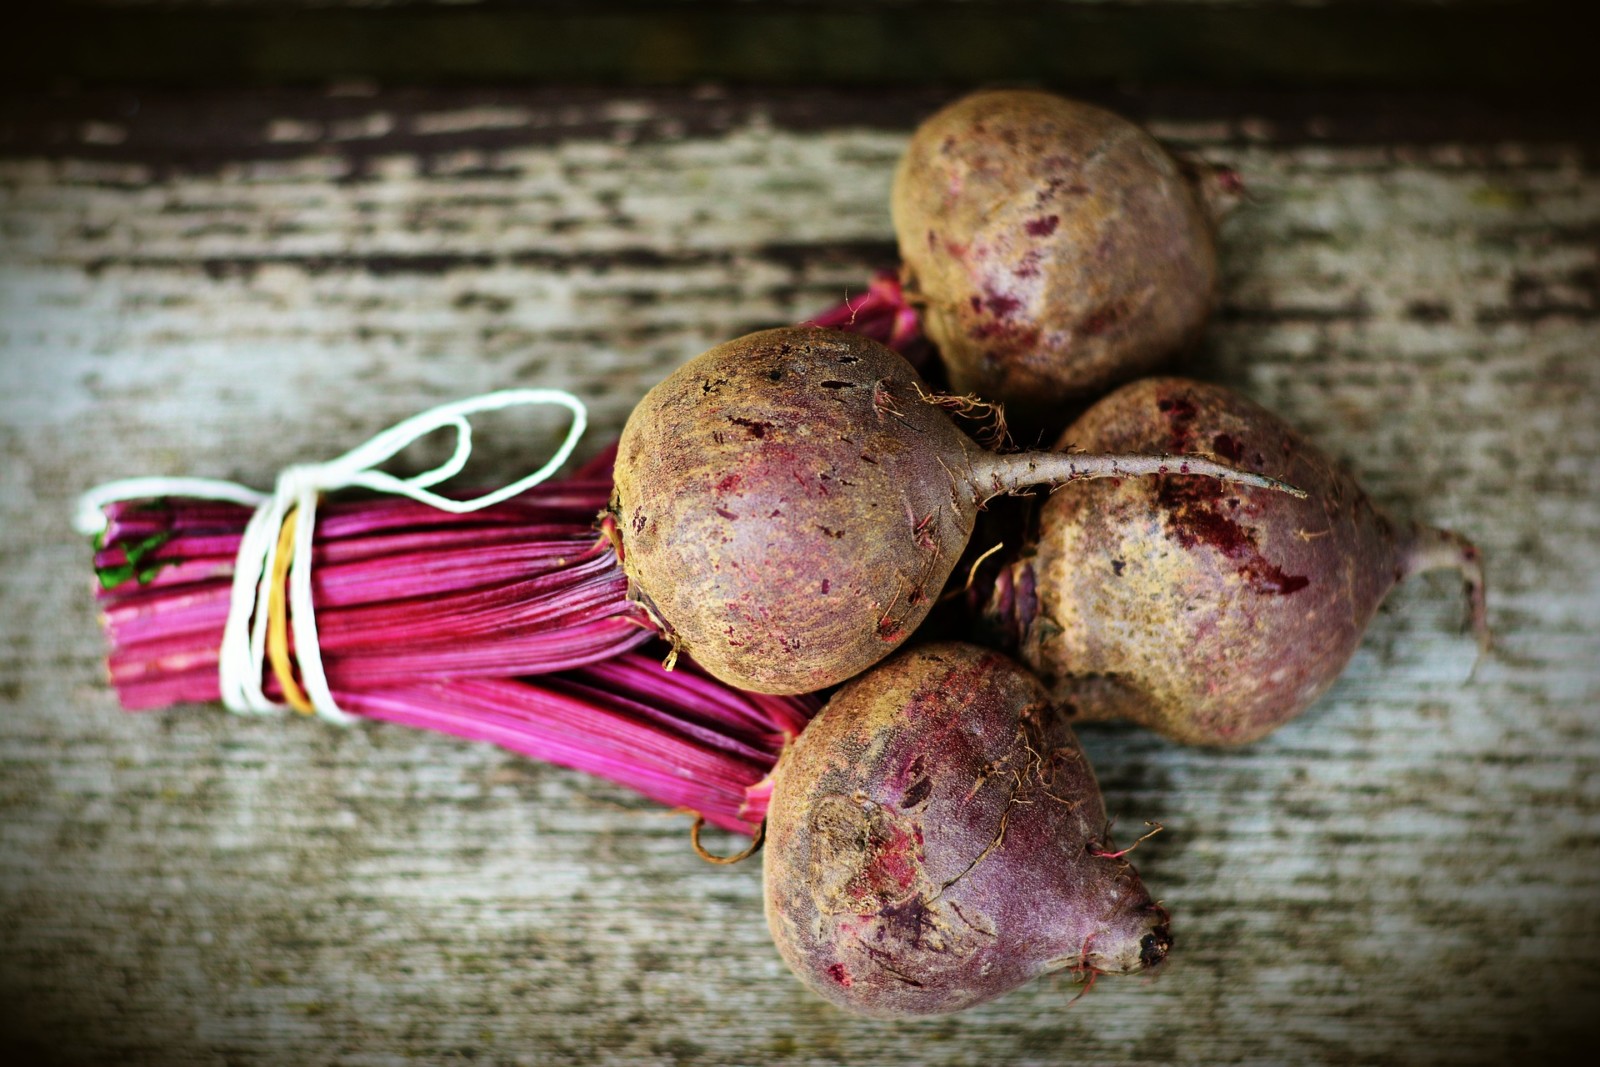 beetroot for a budget meal